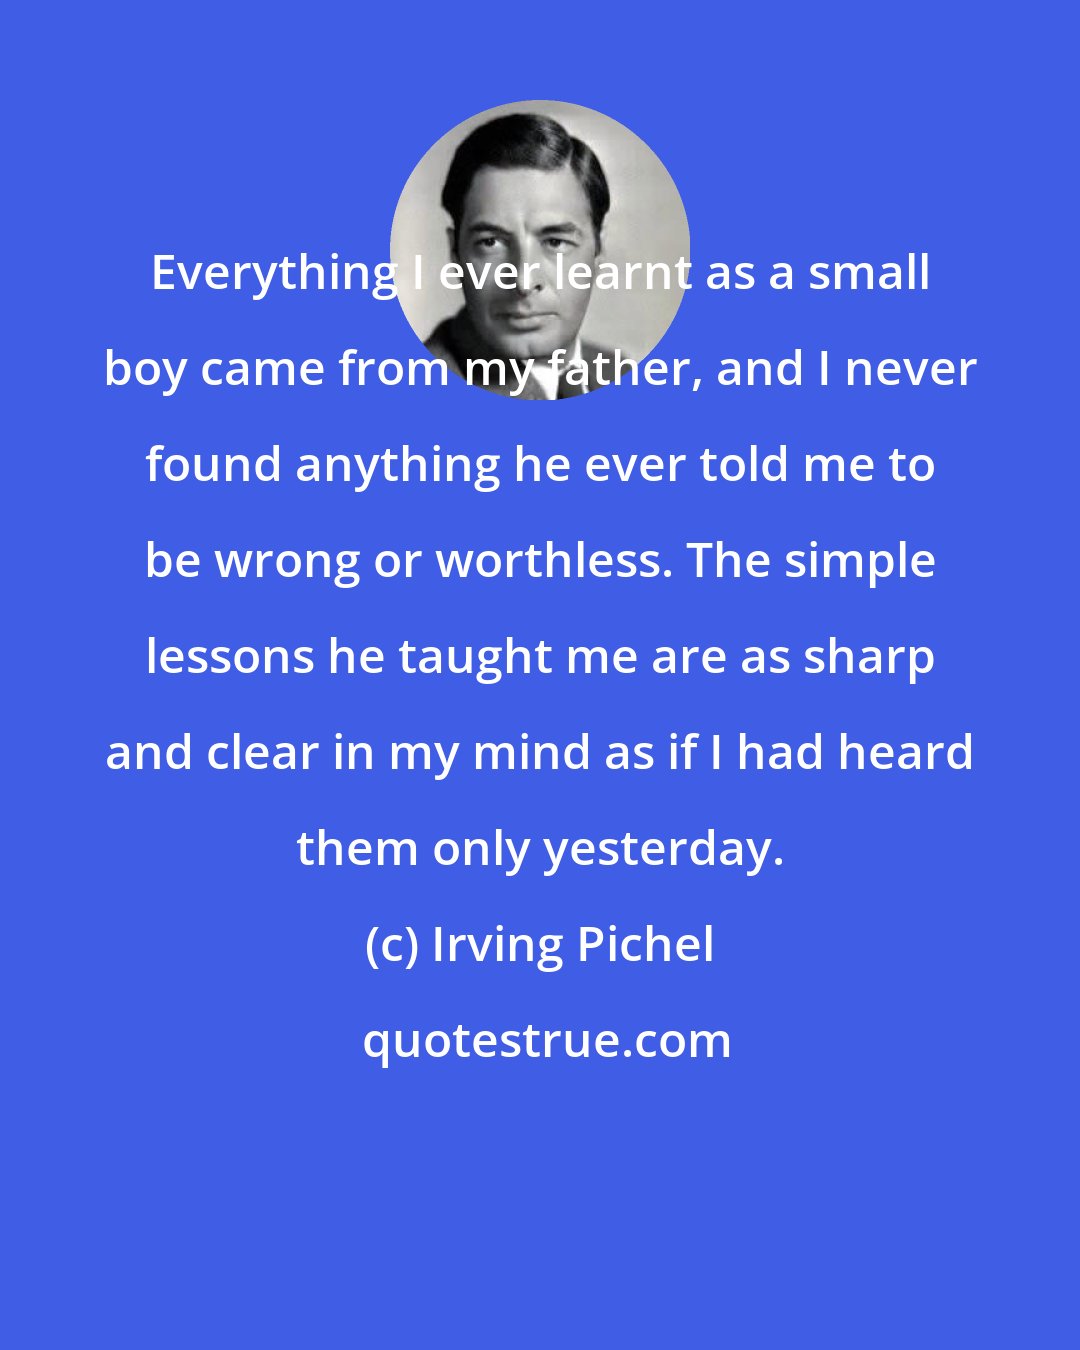 Irving Pichel: Everything I ever learnt as a small boy came from my father, and I never found anything he ever told me to be wrong or worthless. The simple lessons he taught me are as sharp and clear in my mind as if I had heard them only yesterday.